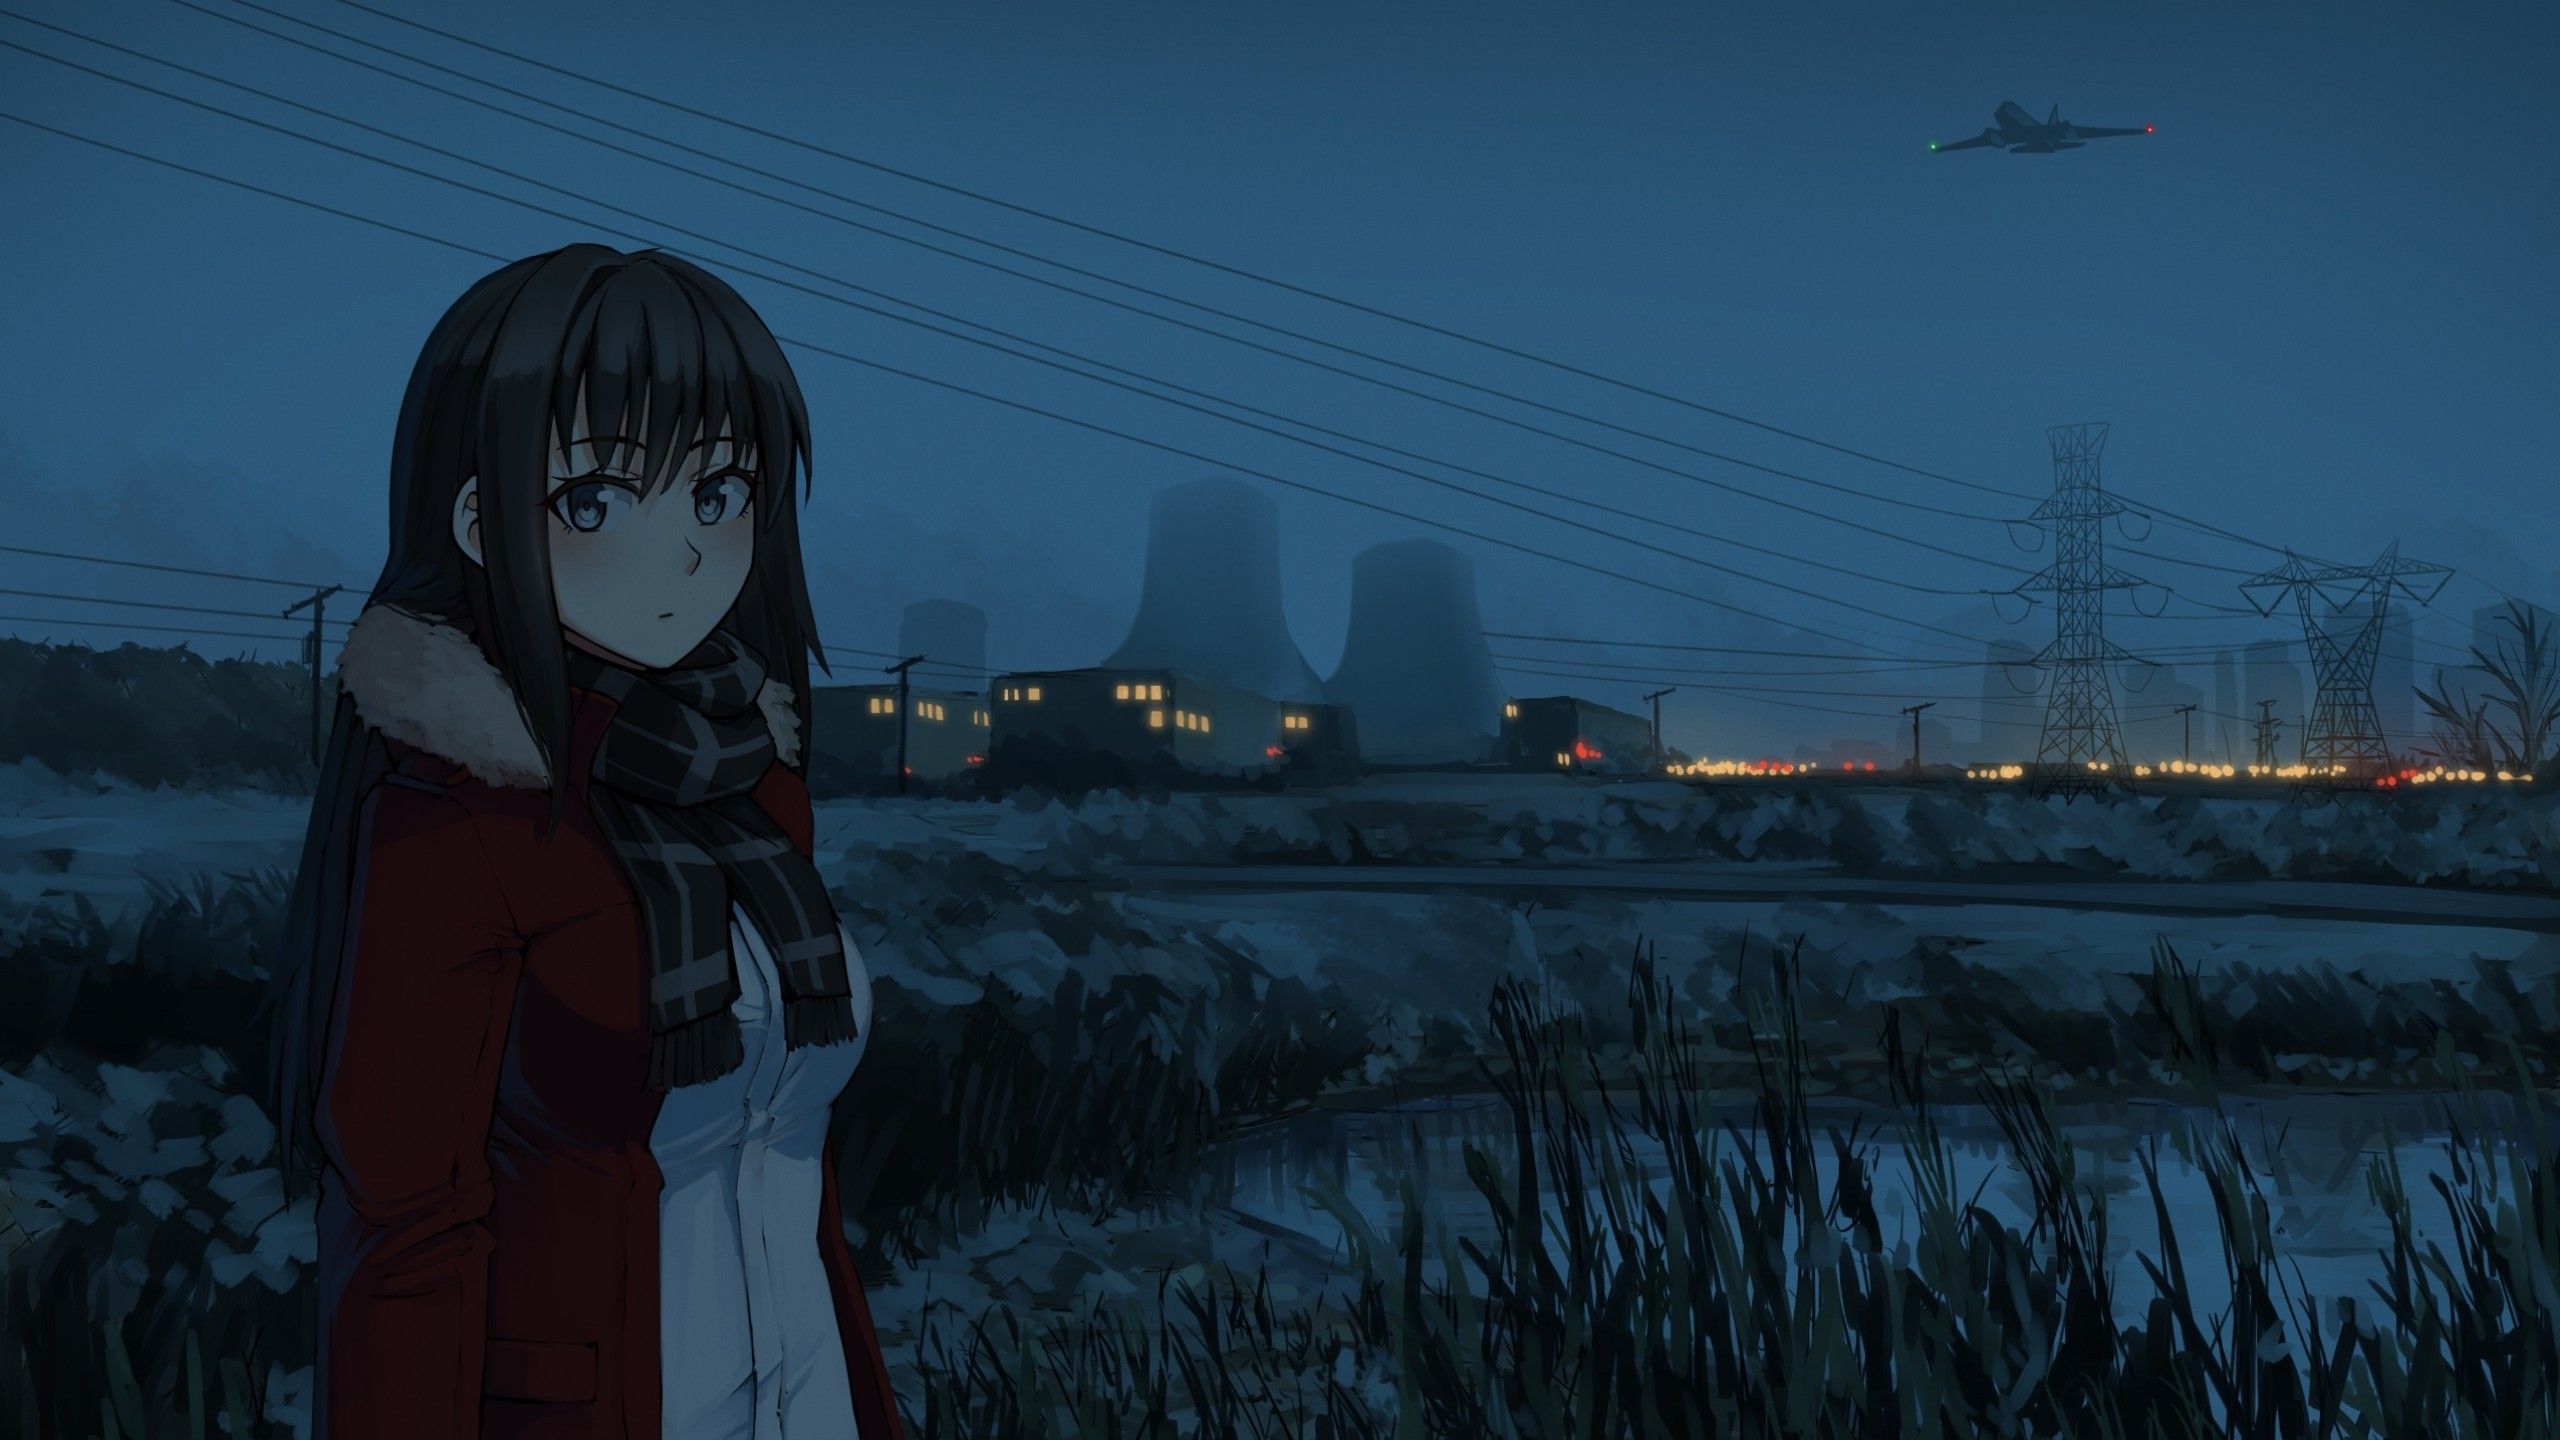 Download 2560x1440 Anime Girl, Airplane, Night, Scarf, Winter, Field, Short Hair, Industrial Buildings Wallpaper for iMac 27 inch